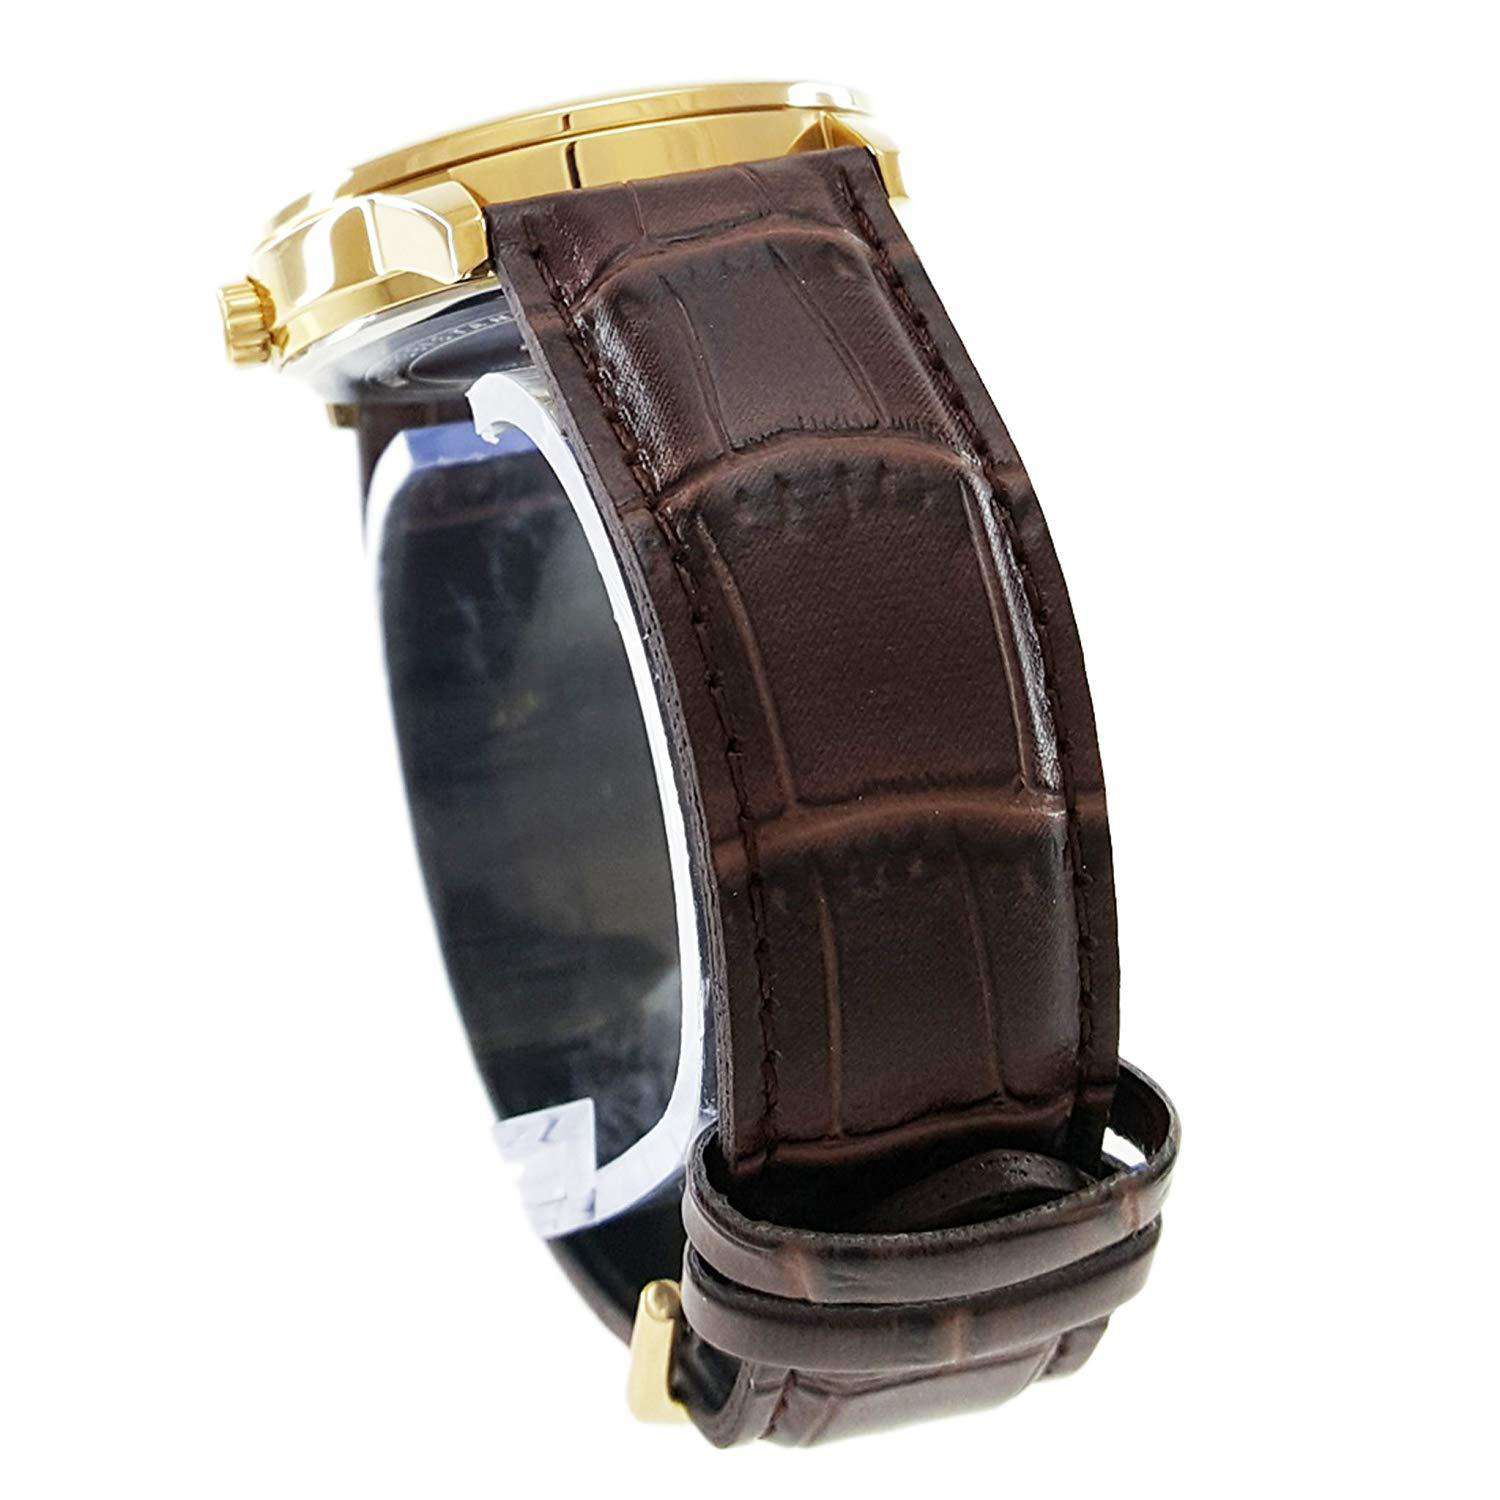 Casio MTP-V002GL-1B Brown Leather Watch for Men-Watch Portal Philippines